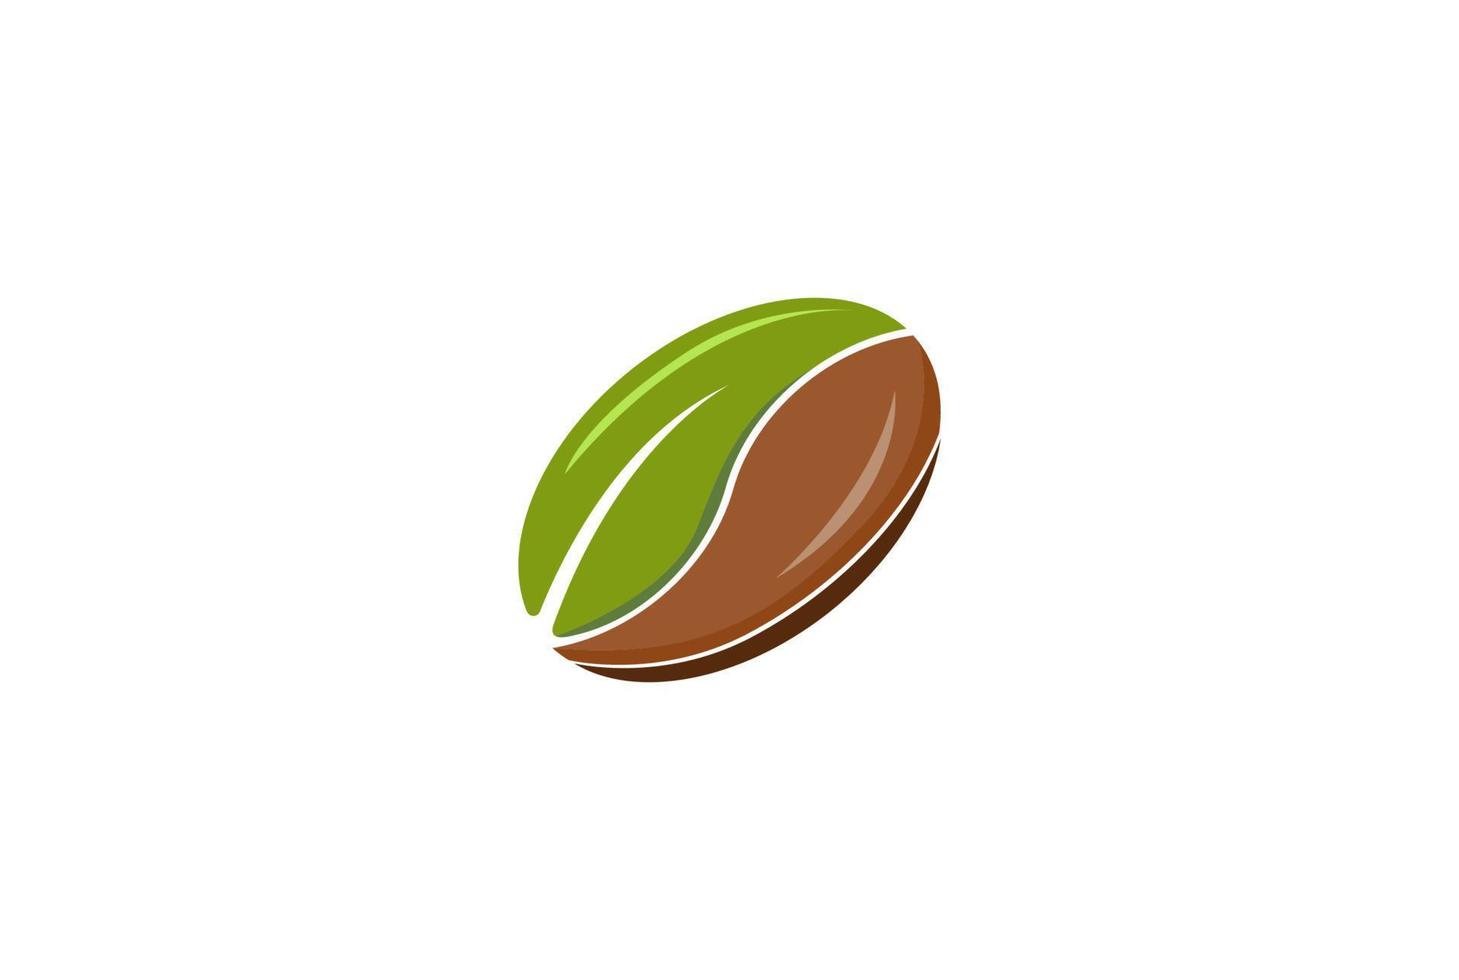 Coffee Bean with Mint Tea Bud Leaf for Coffee Candy Logo Design Vector